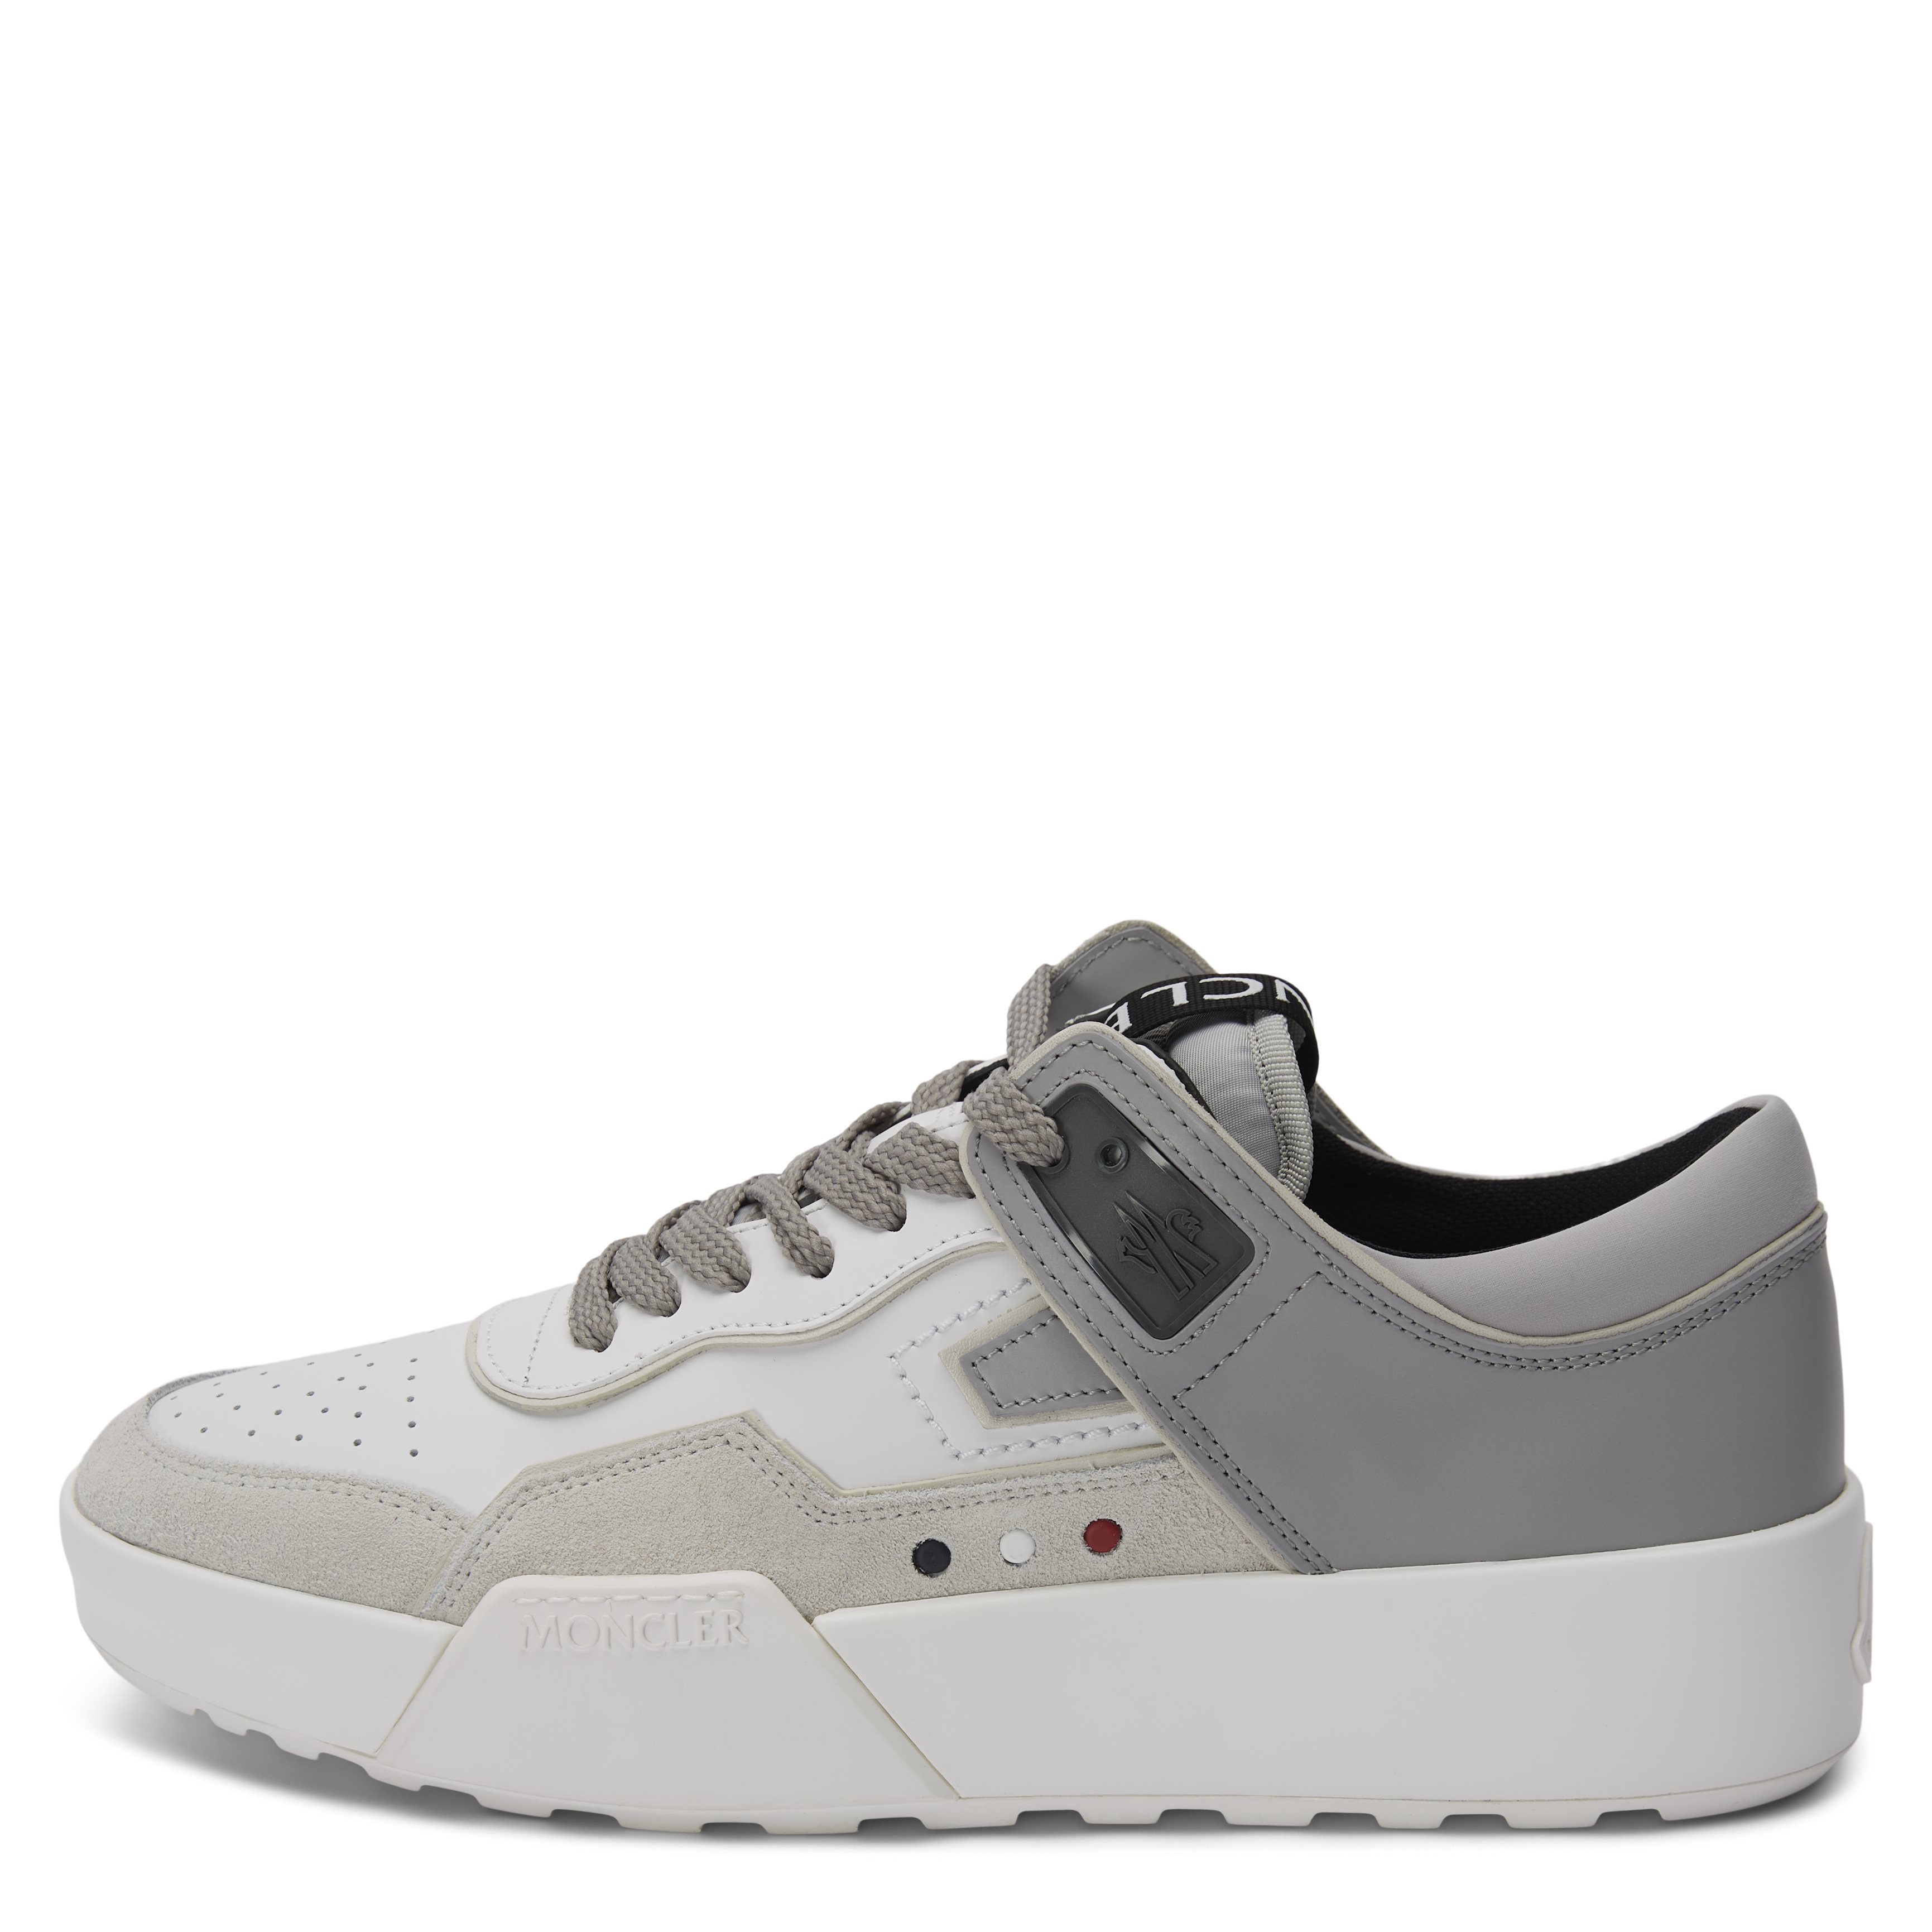 Sneakers - Shoes - Grey